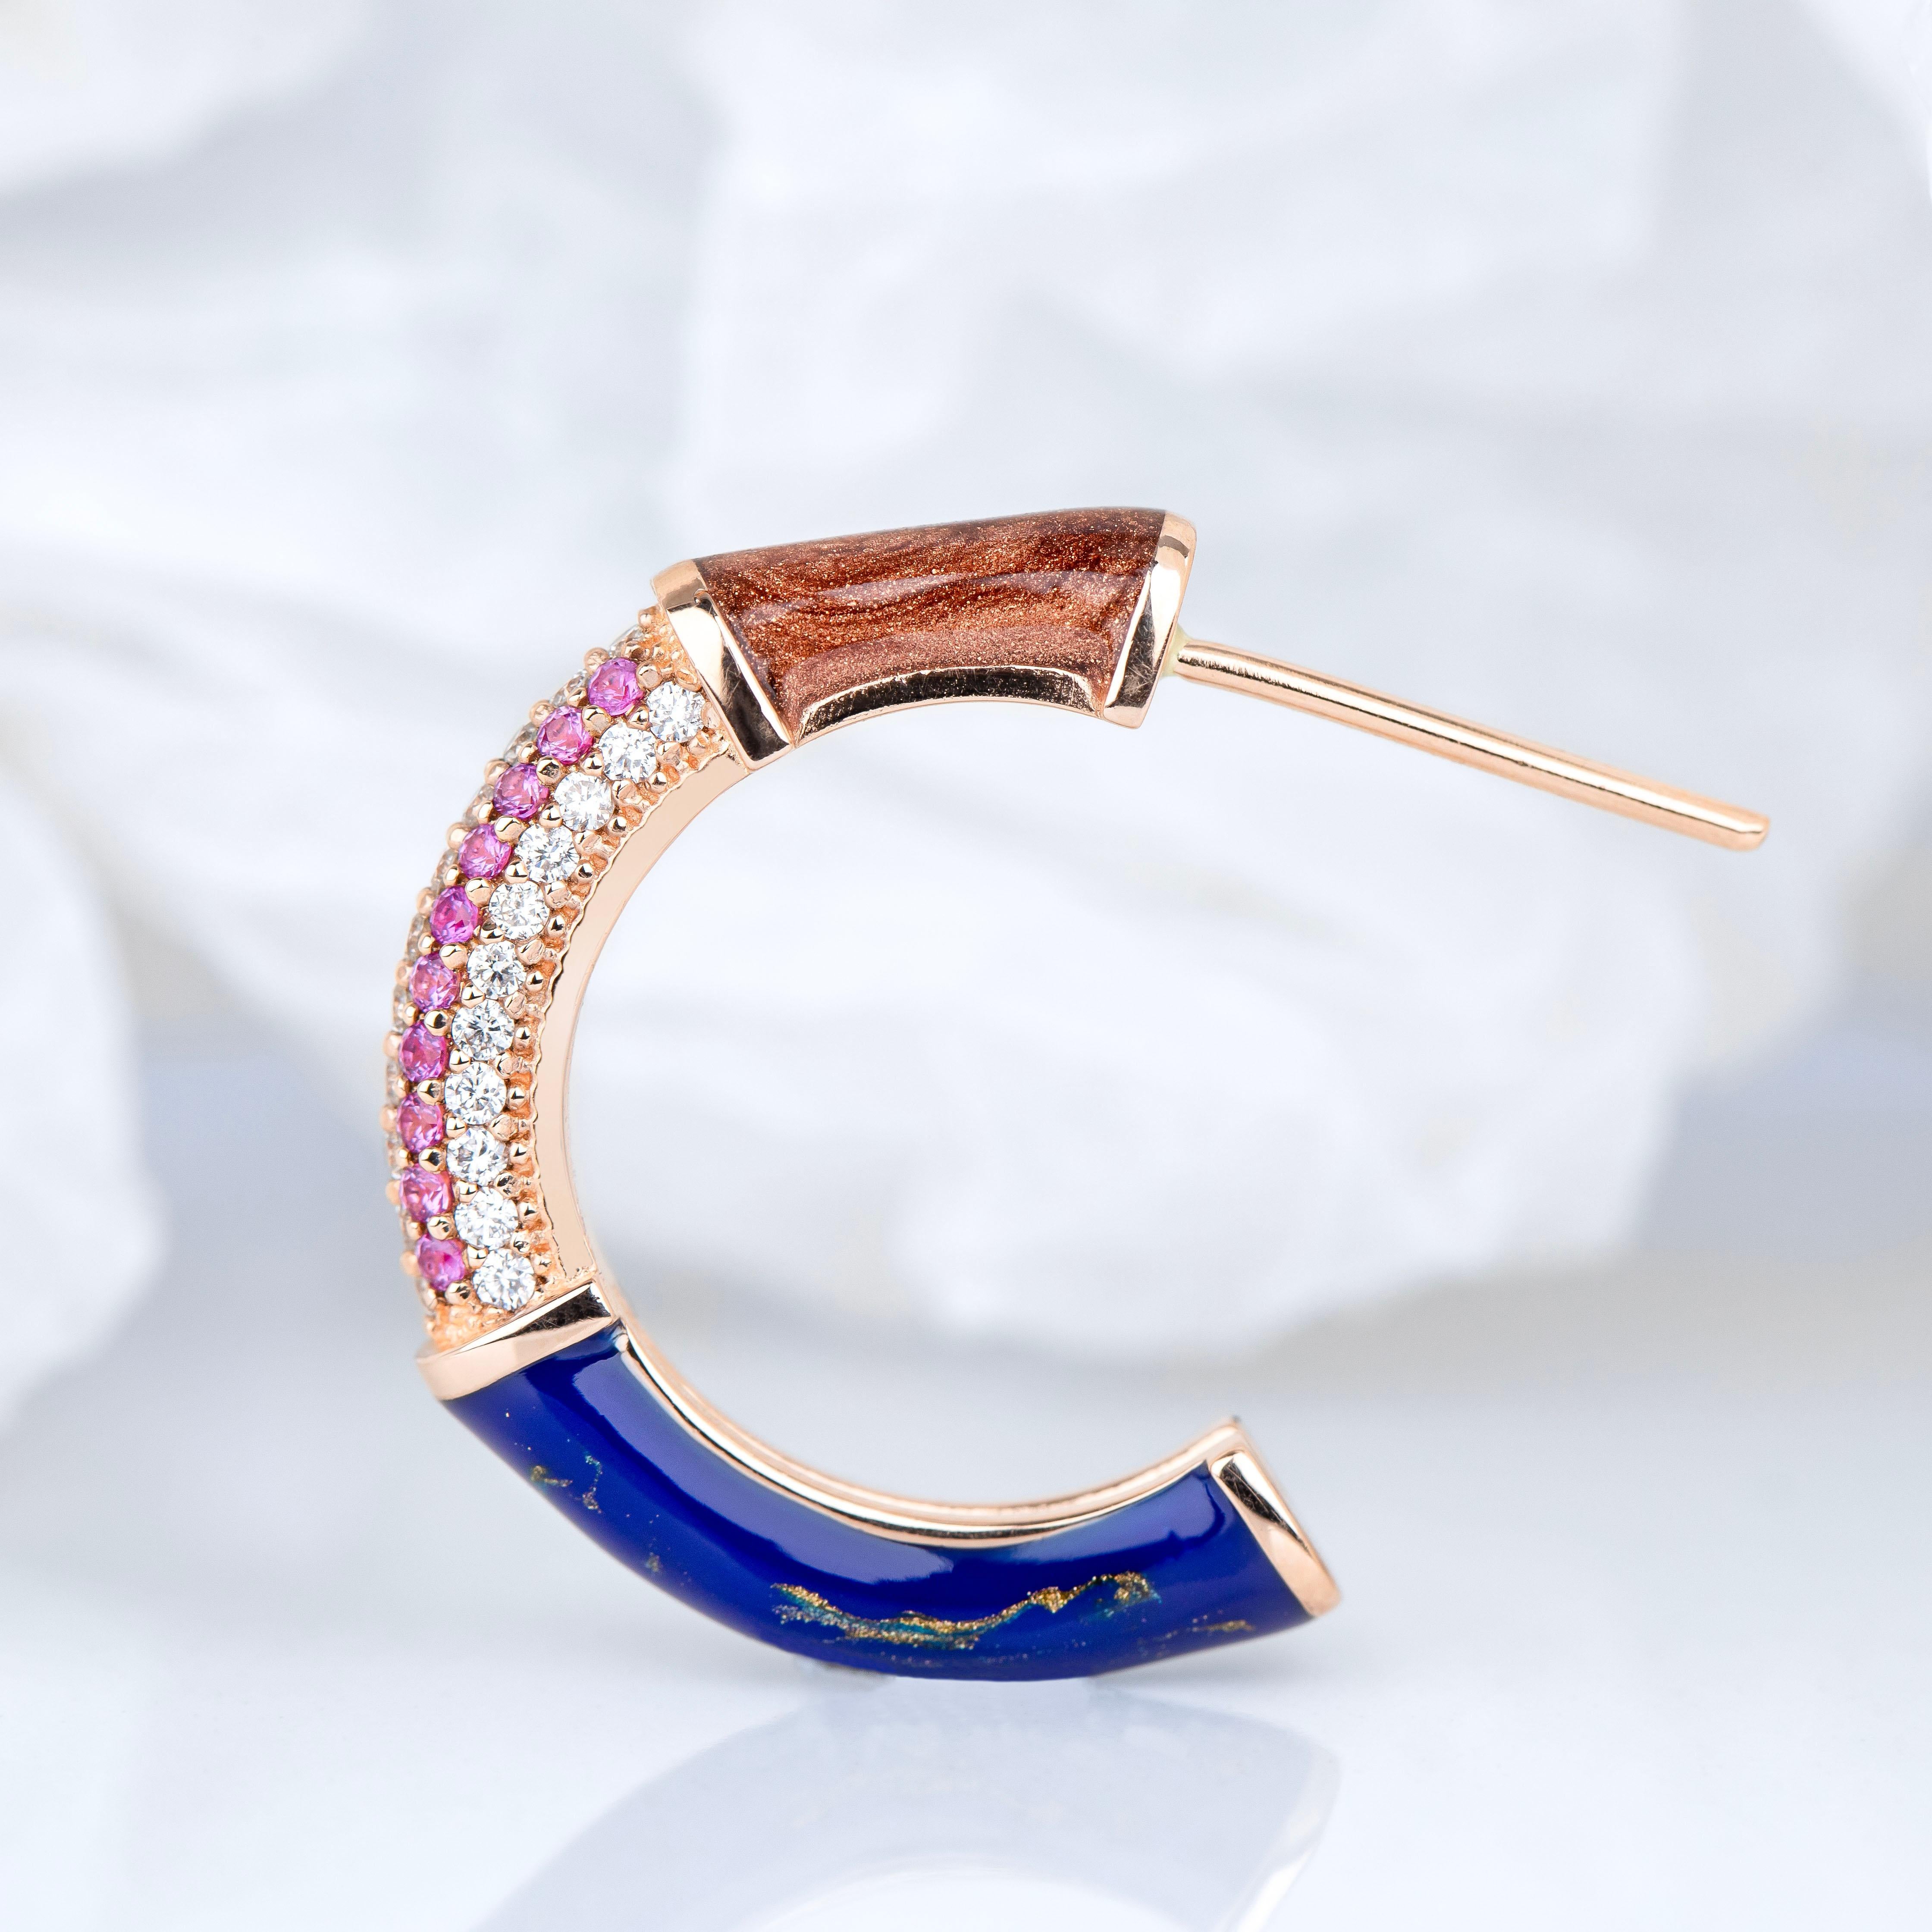 Art Deco Style Gold Earring with Pink Sapphire and Diamond Stone, Bumble Colors Earring

This ring was made with quality materials and excellent handwork. I guarantee the quality assurance of my handwork and materials. It is vital for me that you